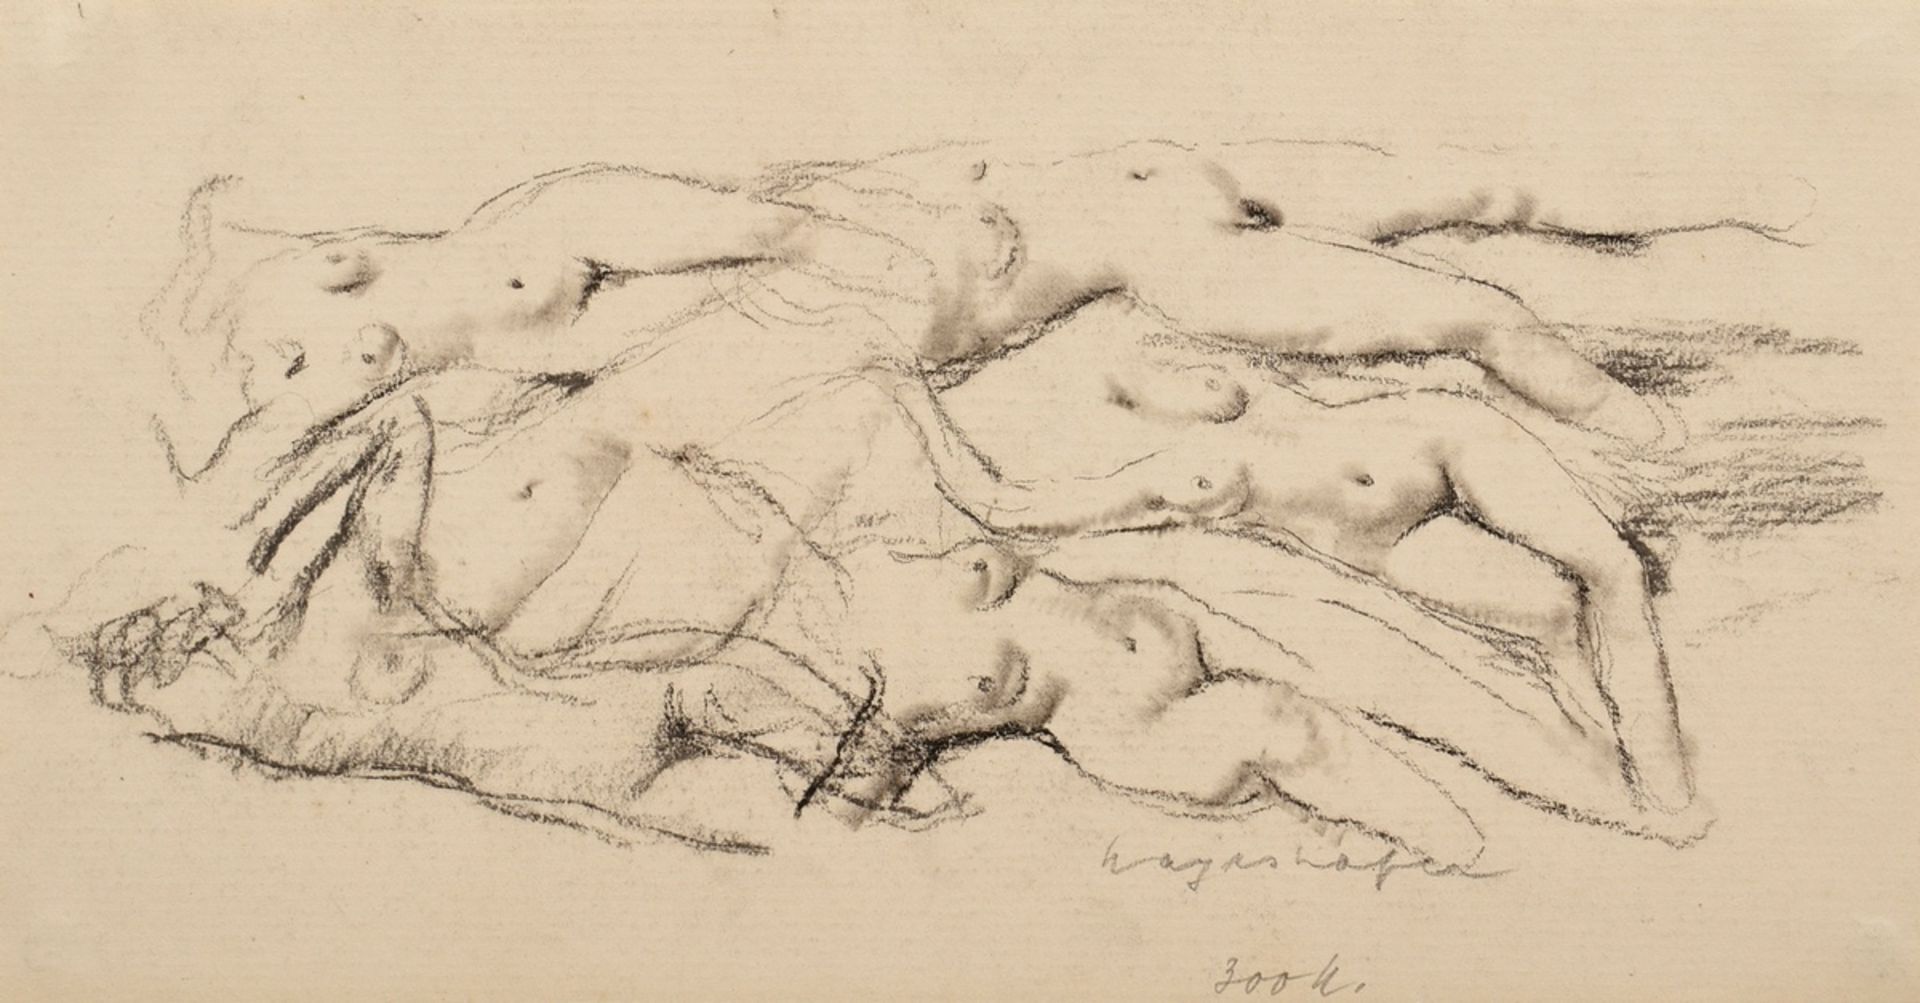 17 Mayershofer, Max (1875-1950) "Female nude drawings", charcoal, each sign., each mounted in passe - Image 2 of 19